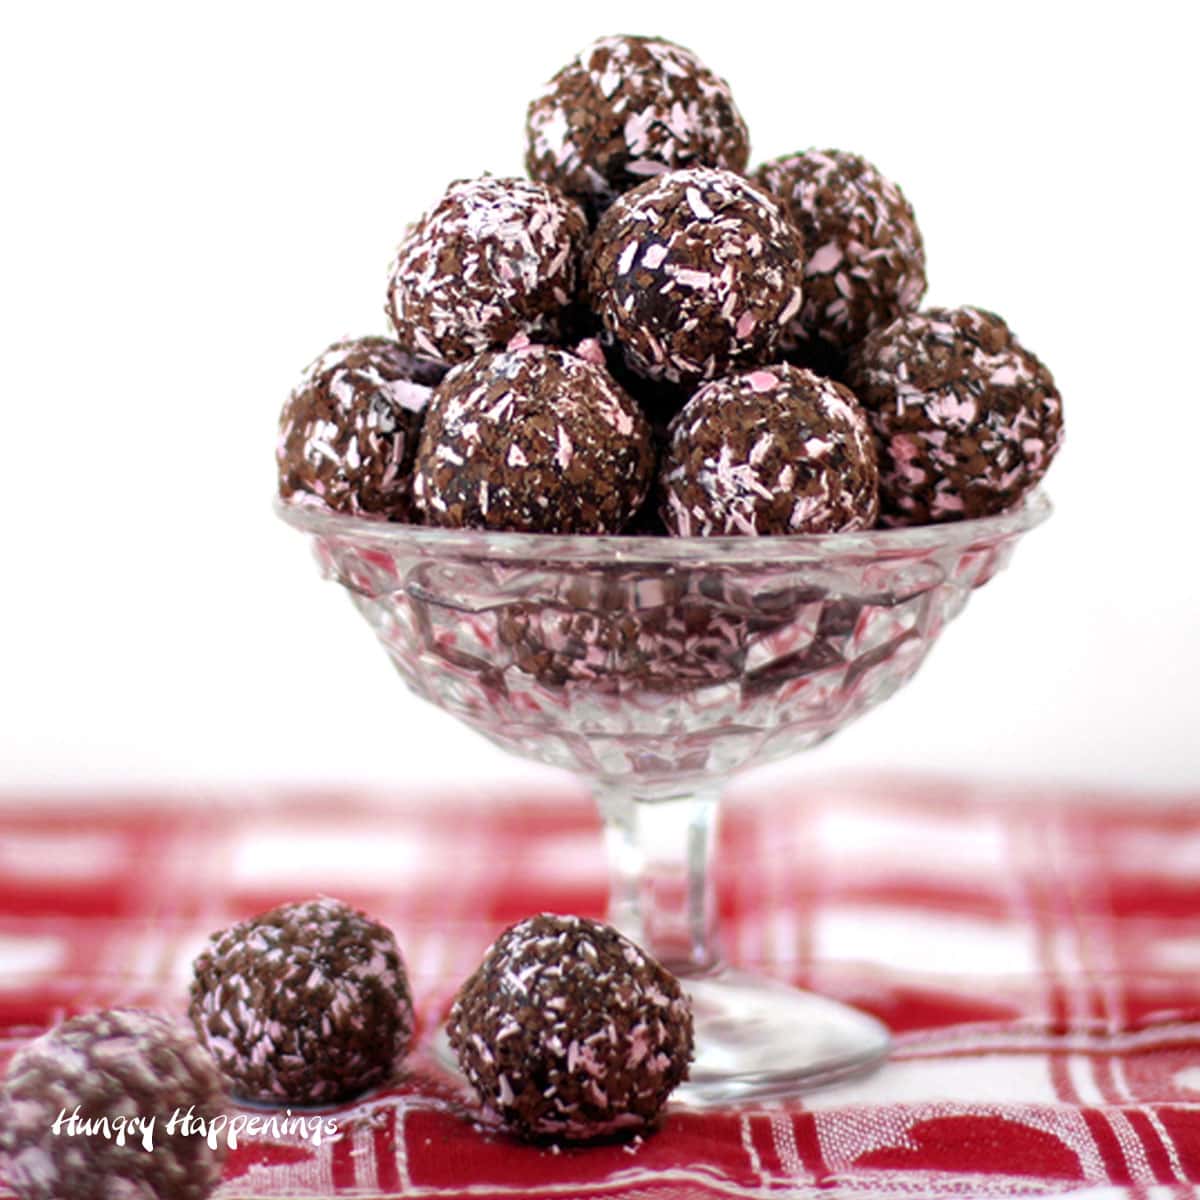 chocolate raspberry truffles made using chocolate and ice cream are coated in shaved pink candy melts and dark chocolate